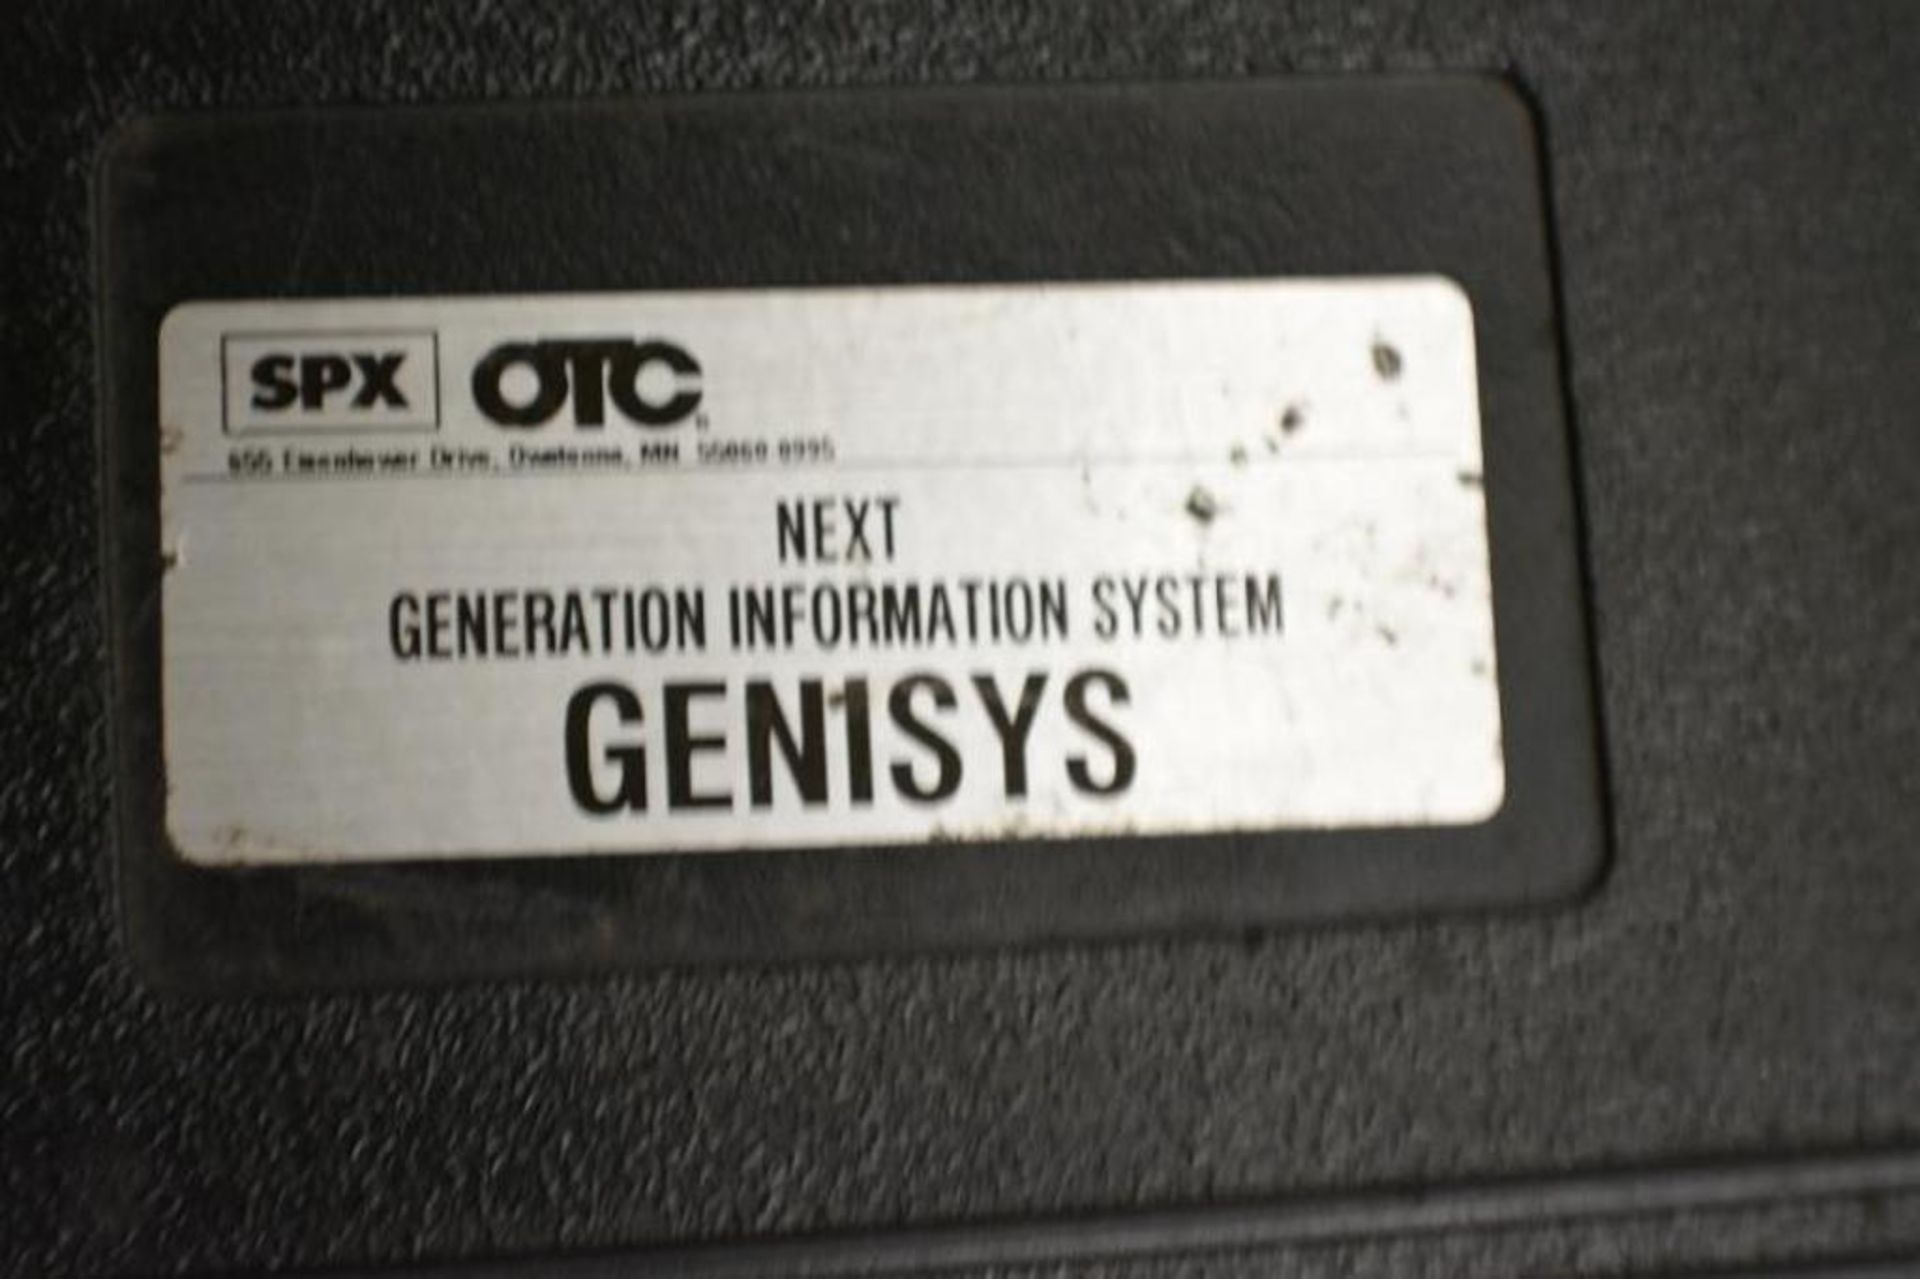 Diagnostic Scanner Genisys SPX OTC 2002 with Cables and Software Suite